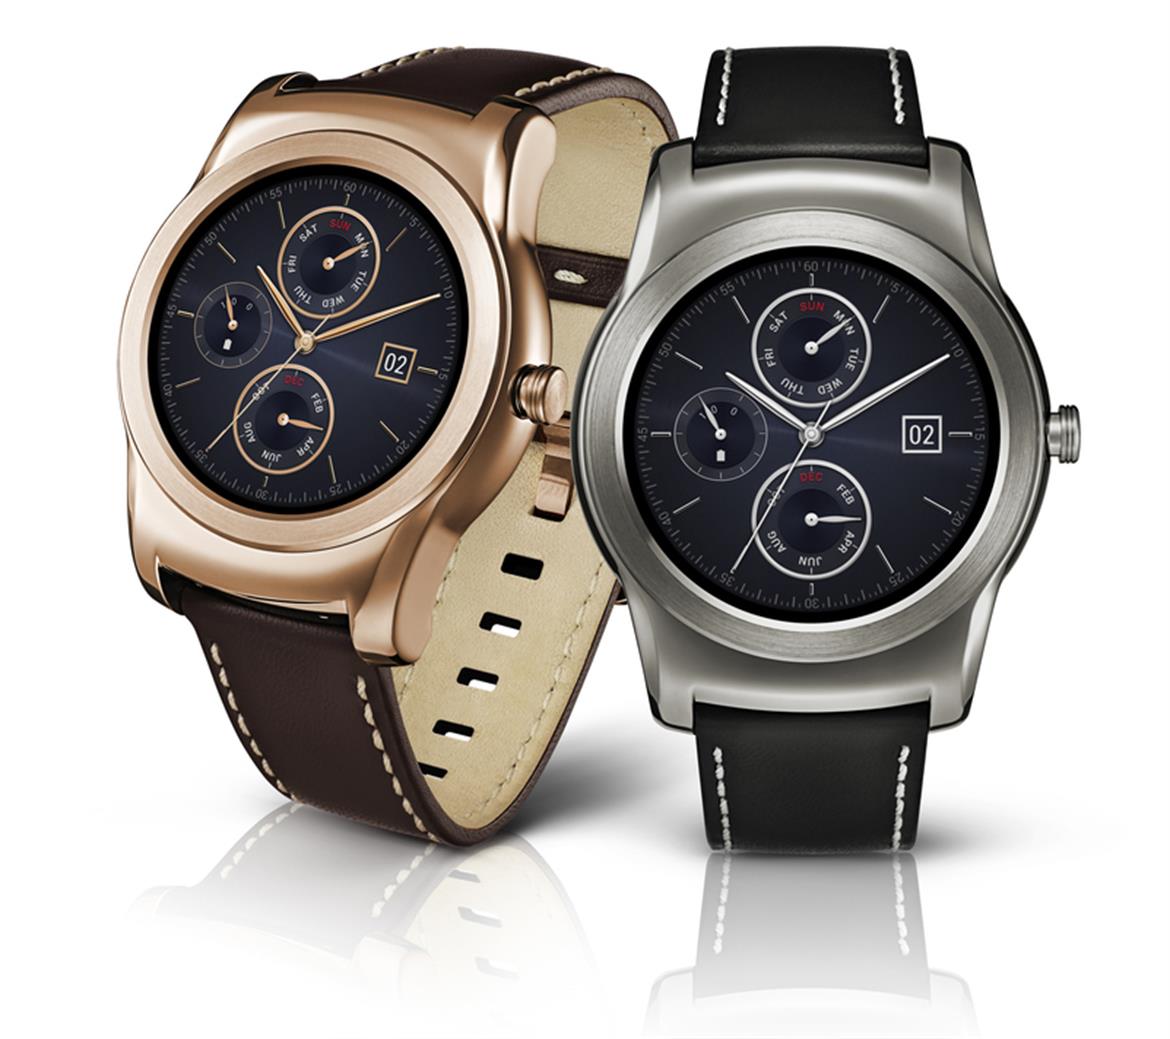 LG Watch Urbane Brings Chic Looks And All-Metal Body To Android Wear